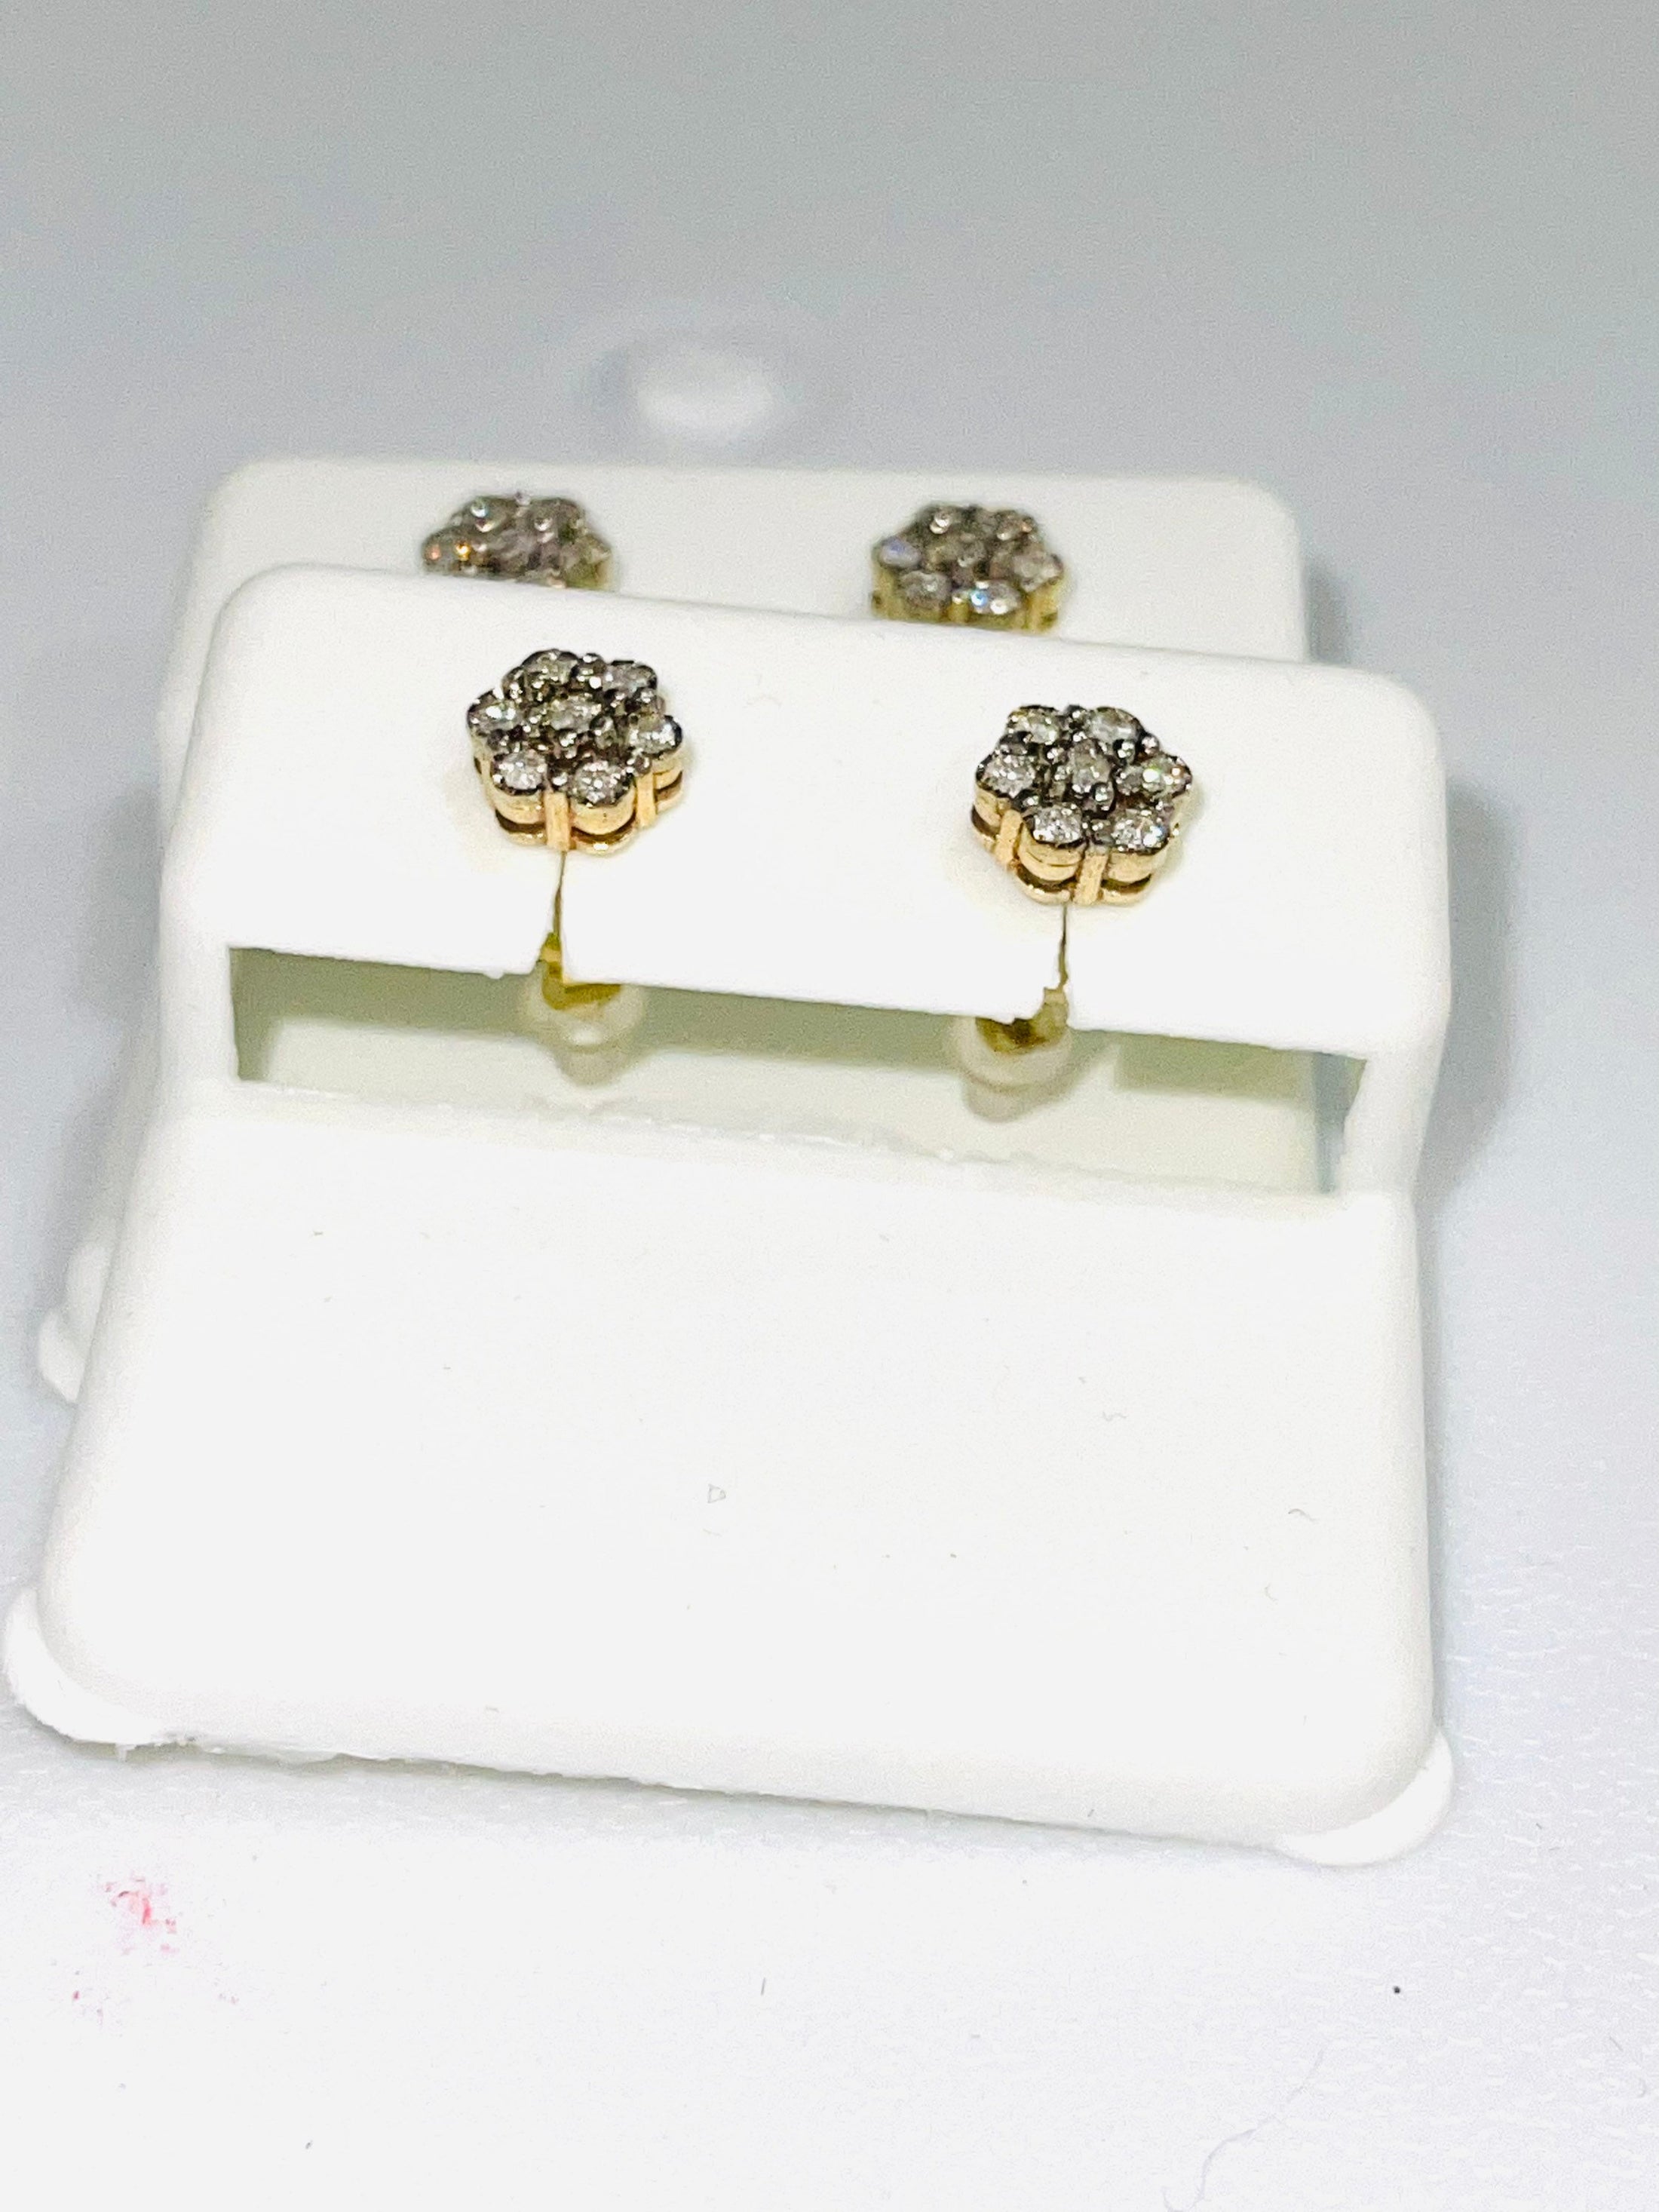 10k solid gold flower diamond earrings 1/3ct genuine natural diamond Free appraisal Gift box Free shipping Best Christmas occasions sale!